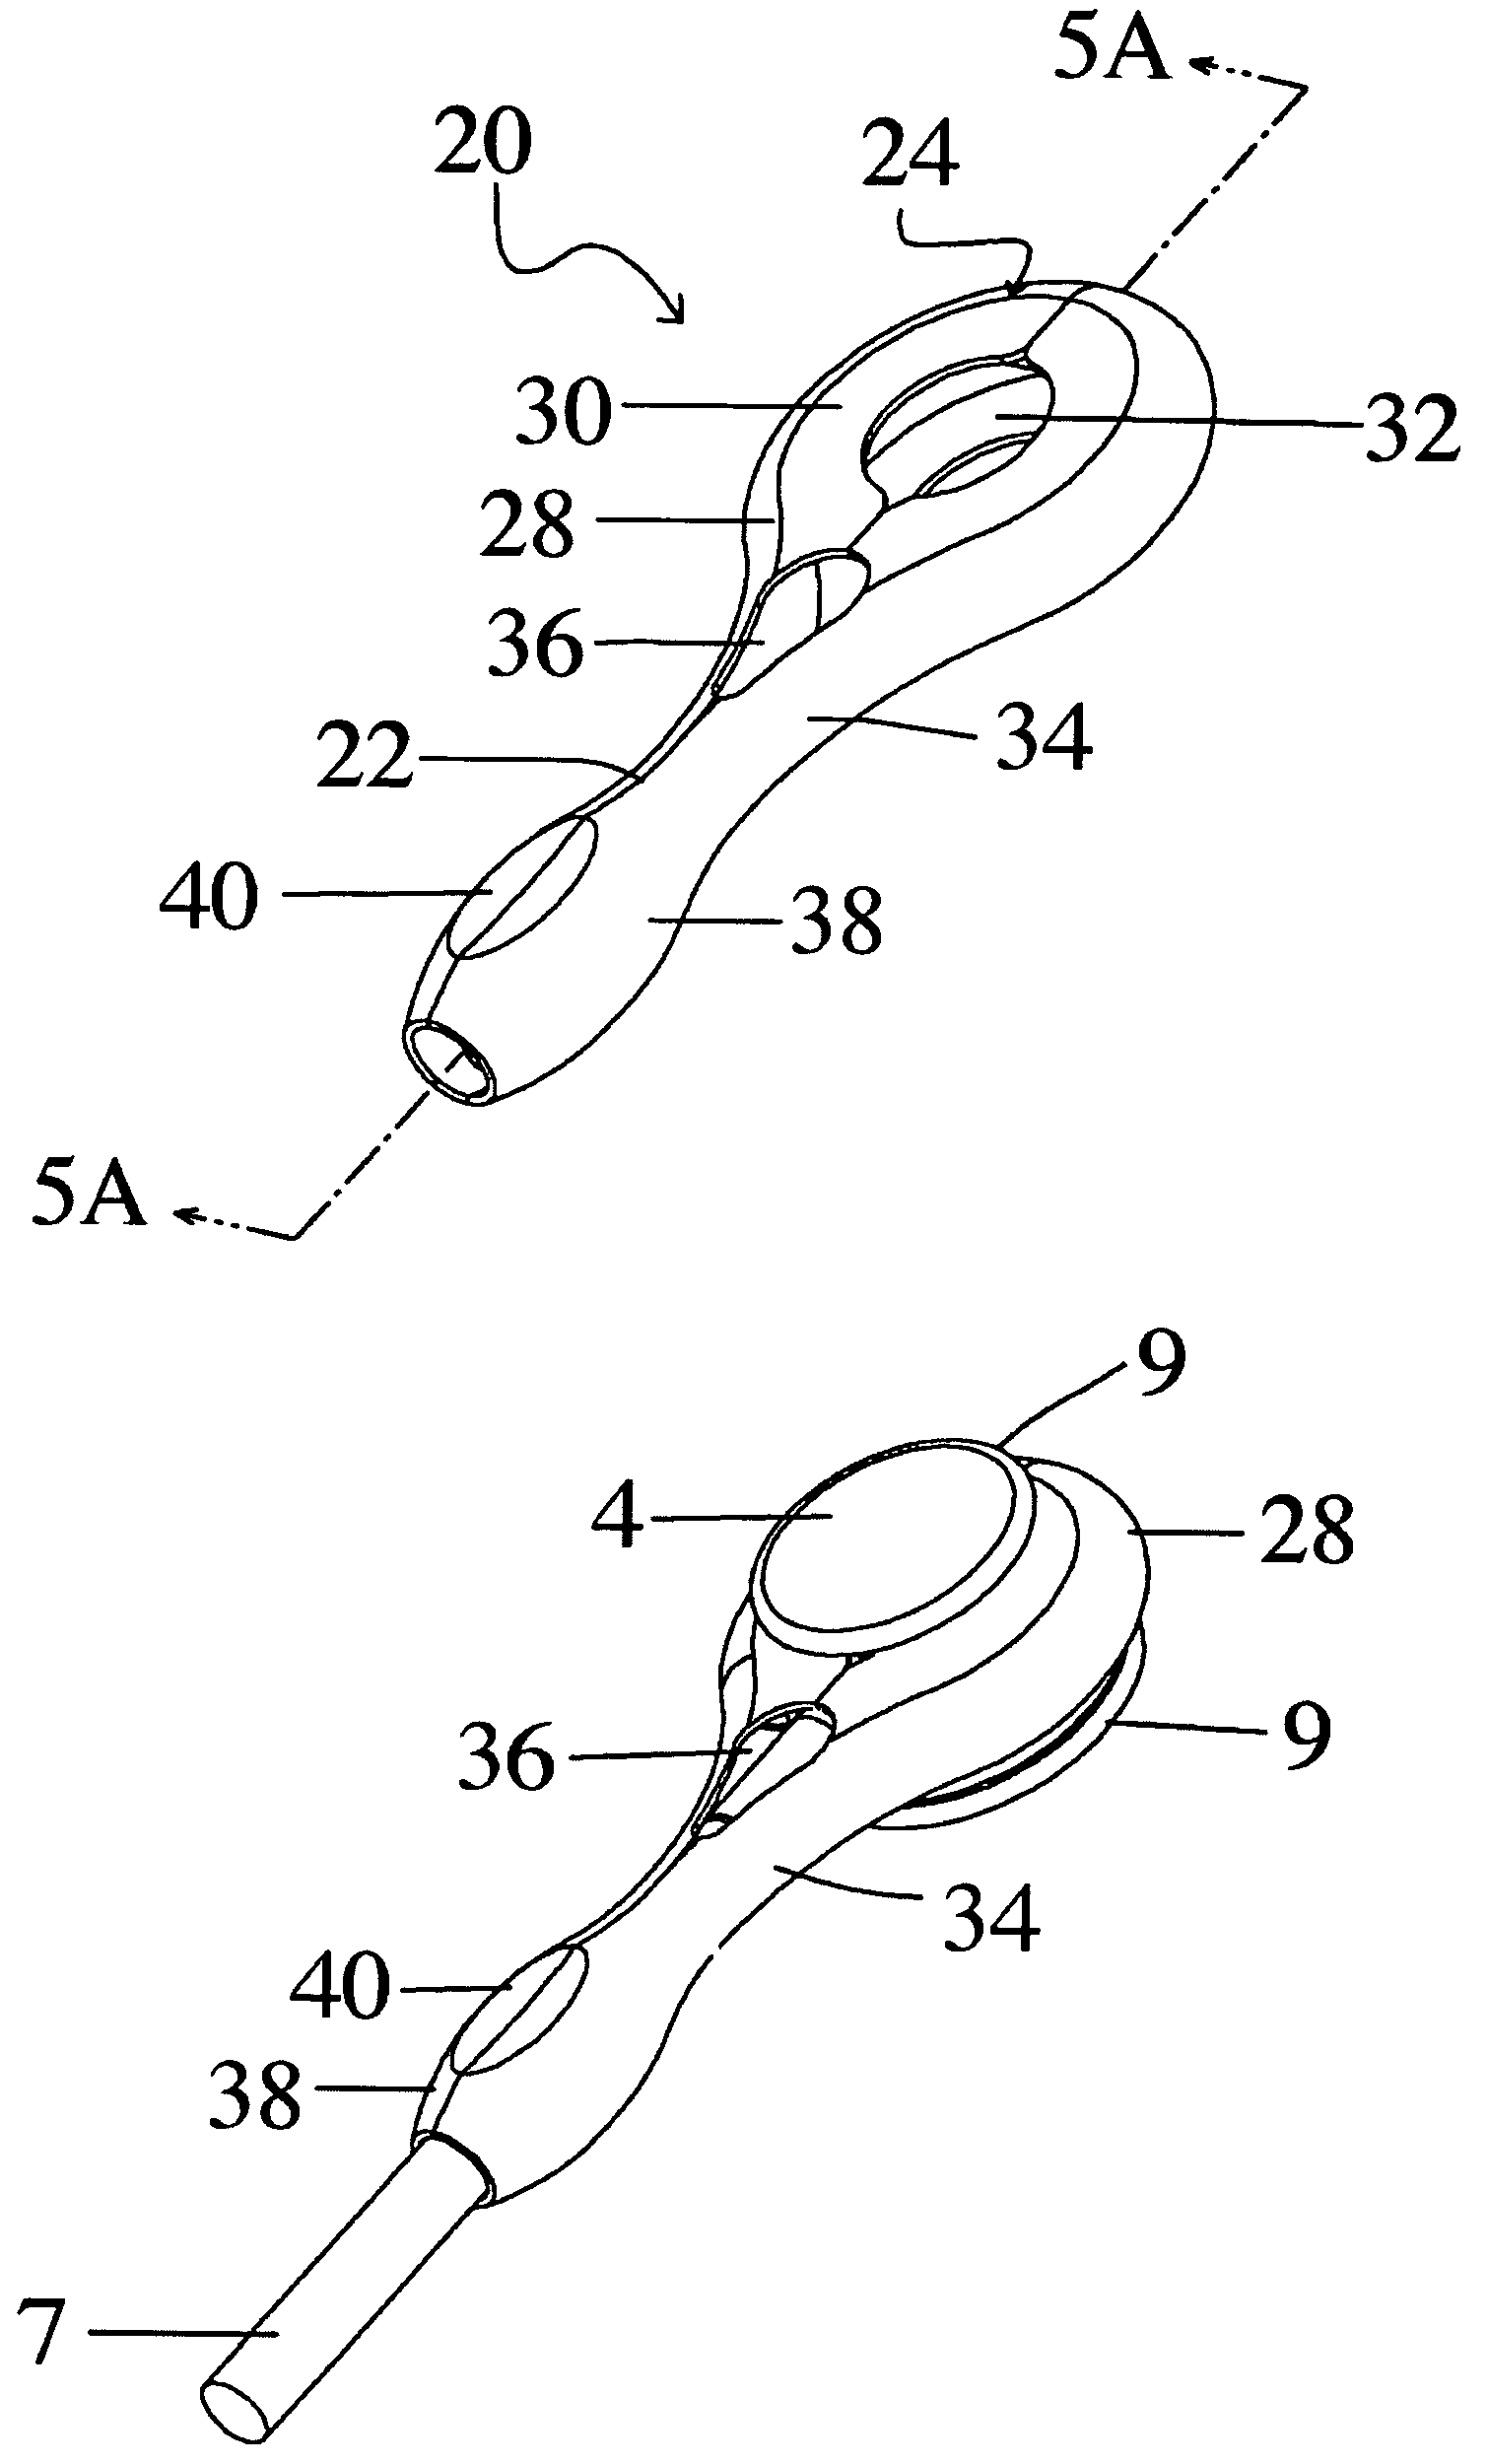 Method and device for utilization of a stethoscope as a neurological diagnostic tool and percussion tool